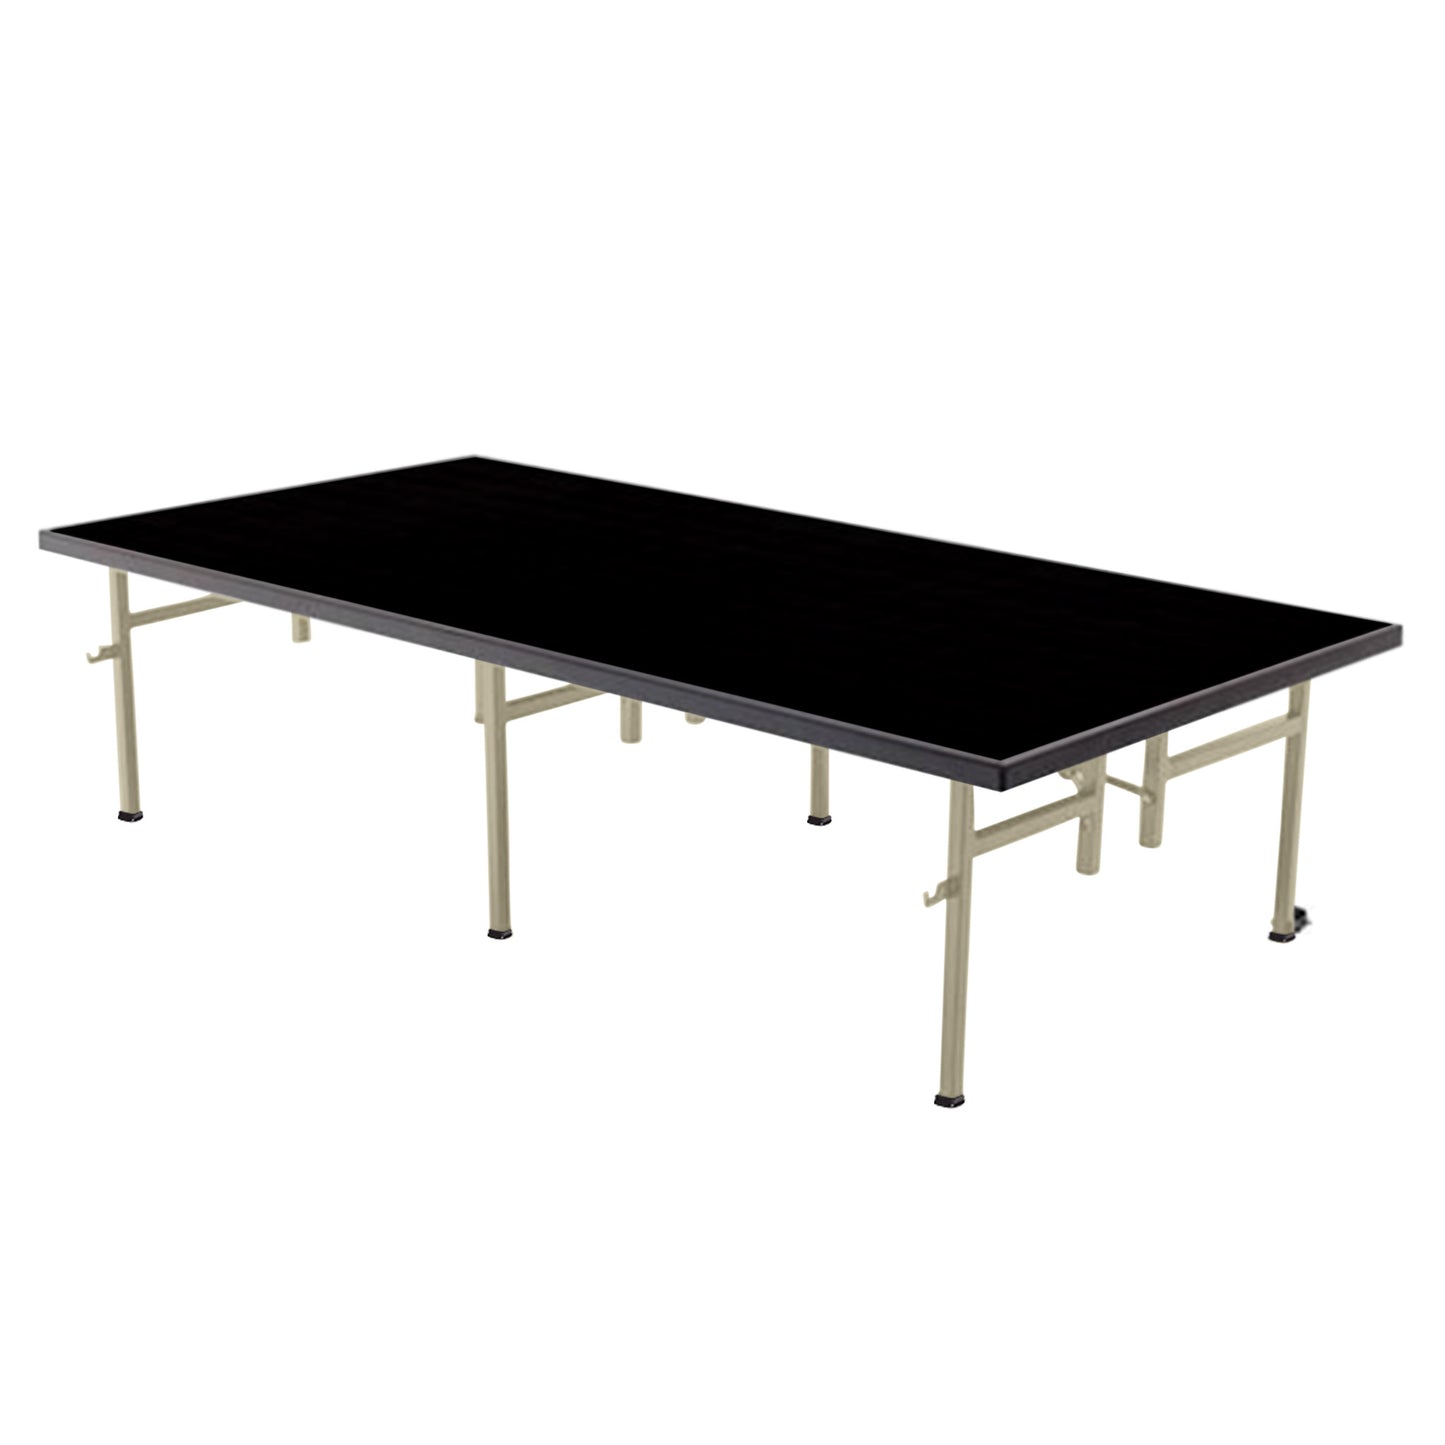 AmTab Fixed Height Stage - Polypropylene Top - 48"W x 96"L x 16"H  (AmTab AMT-ST4816P)